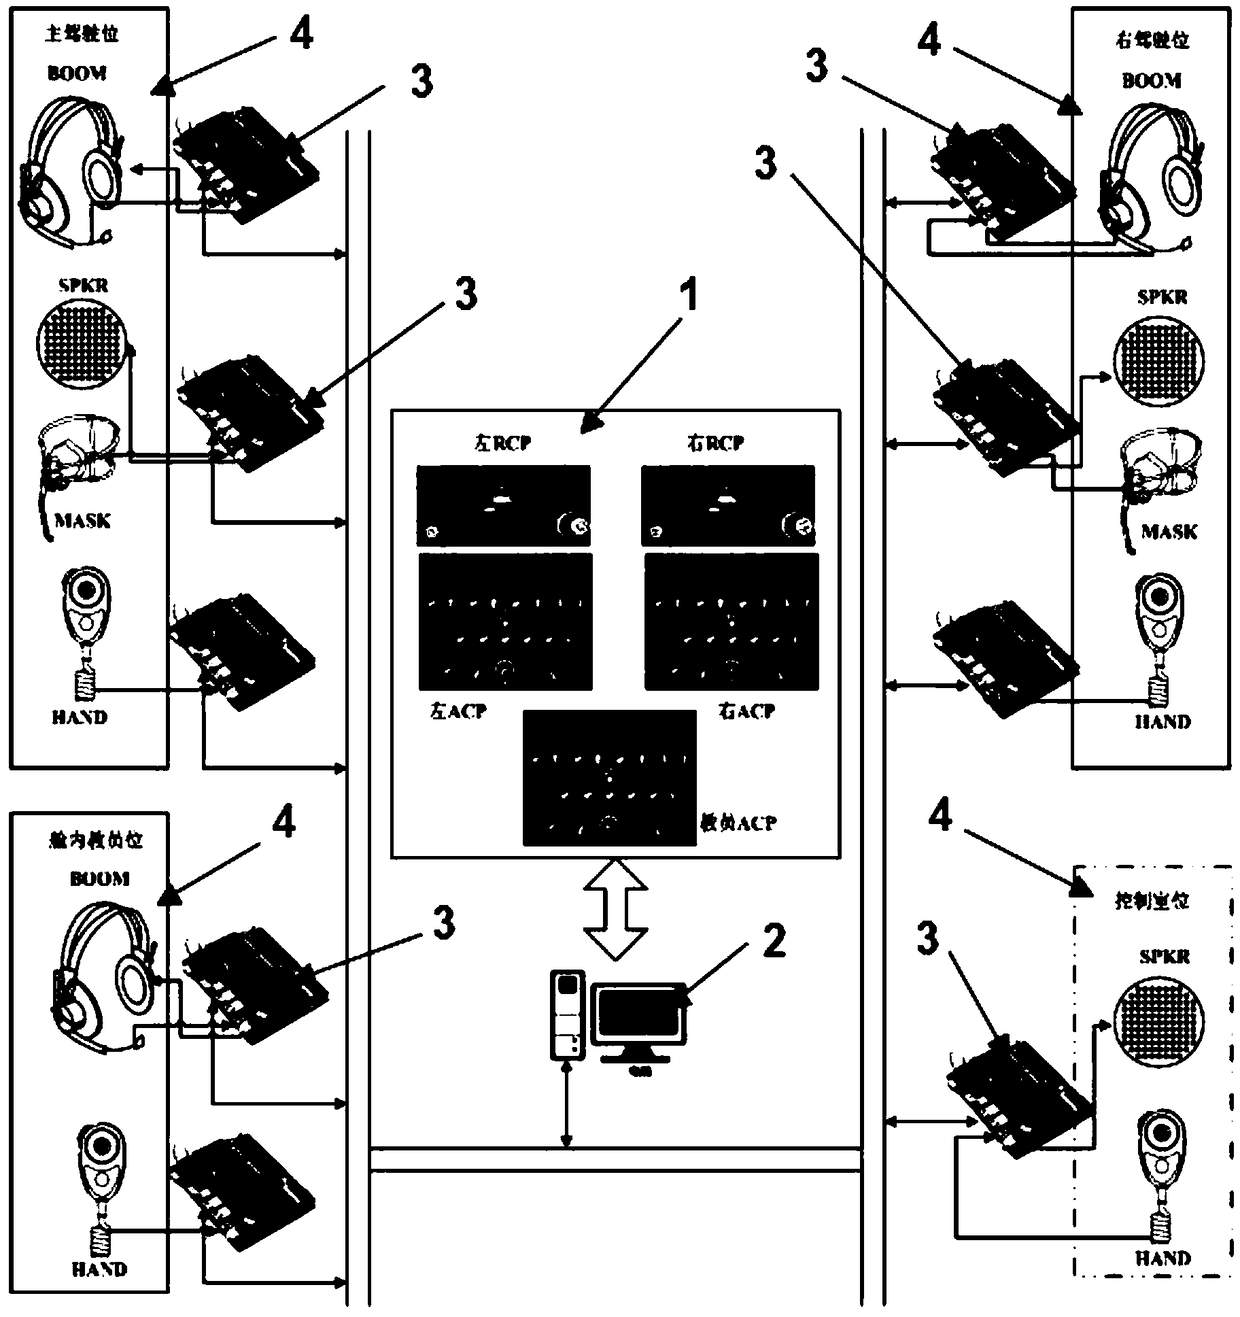 A multi-channel voice communication simulation system and method for a flight simulator